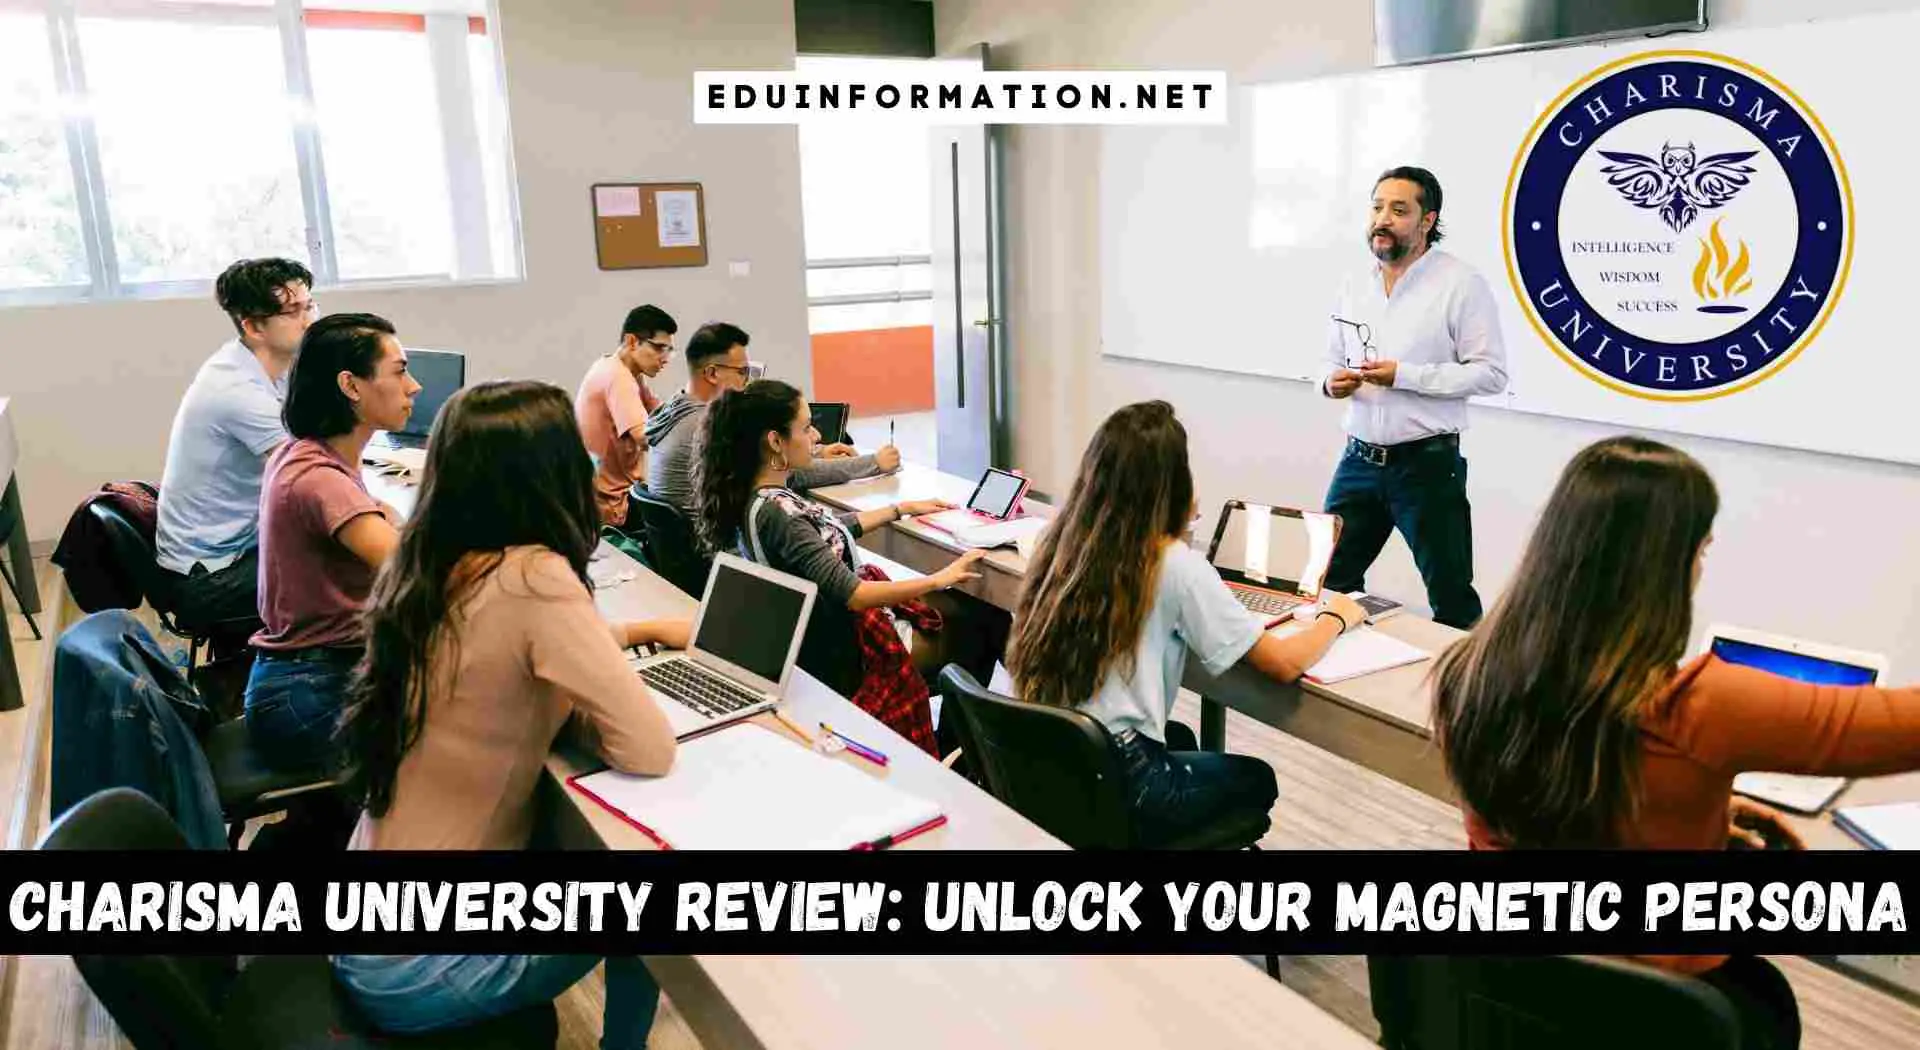 Charisma University Review: Unlock Your Magnetic Persona